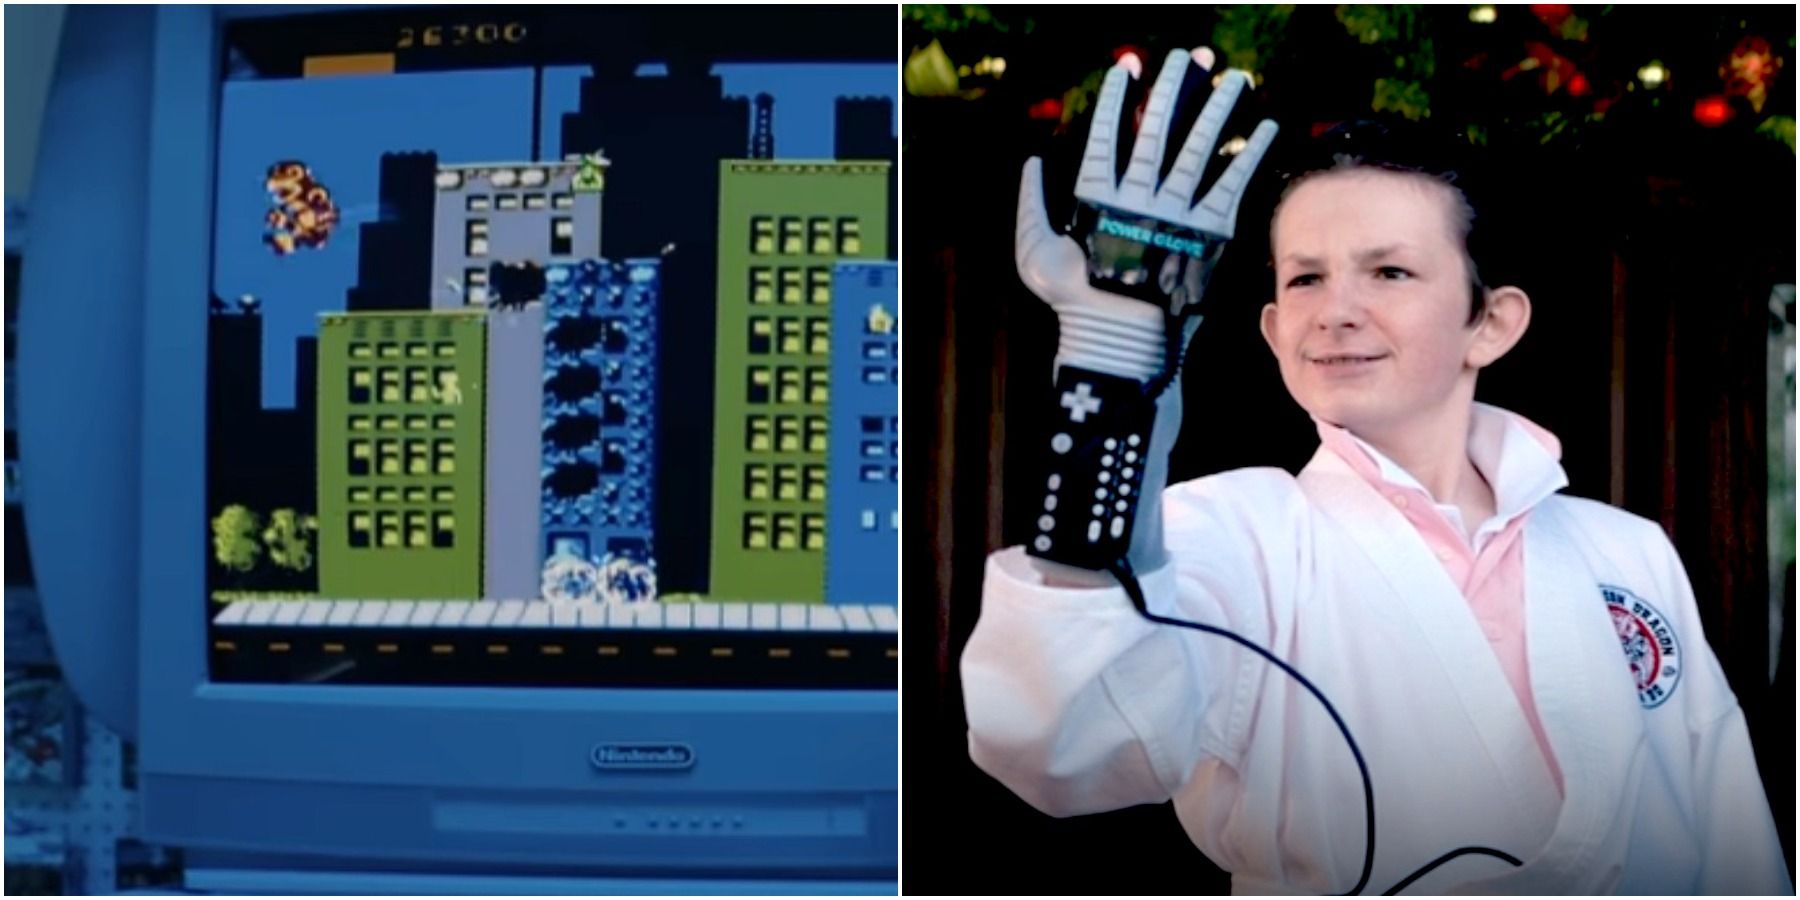 8-Bit Christmas split image of Rampage on TV and Keane with Power Glove